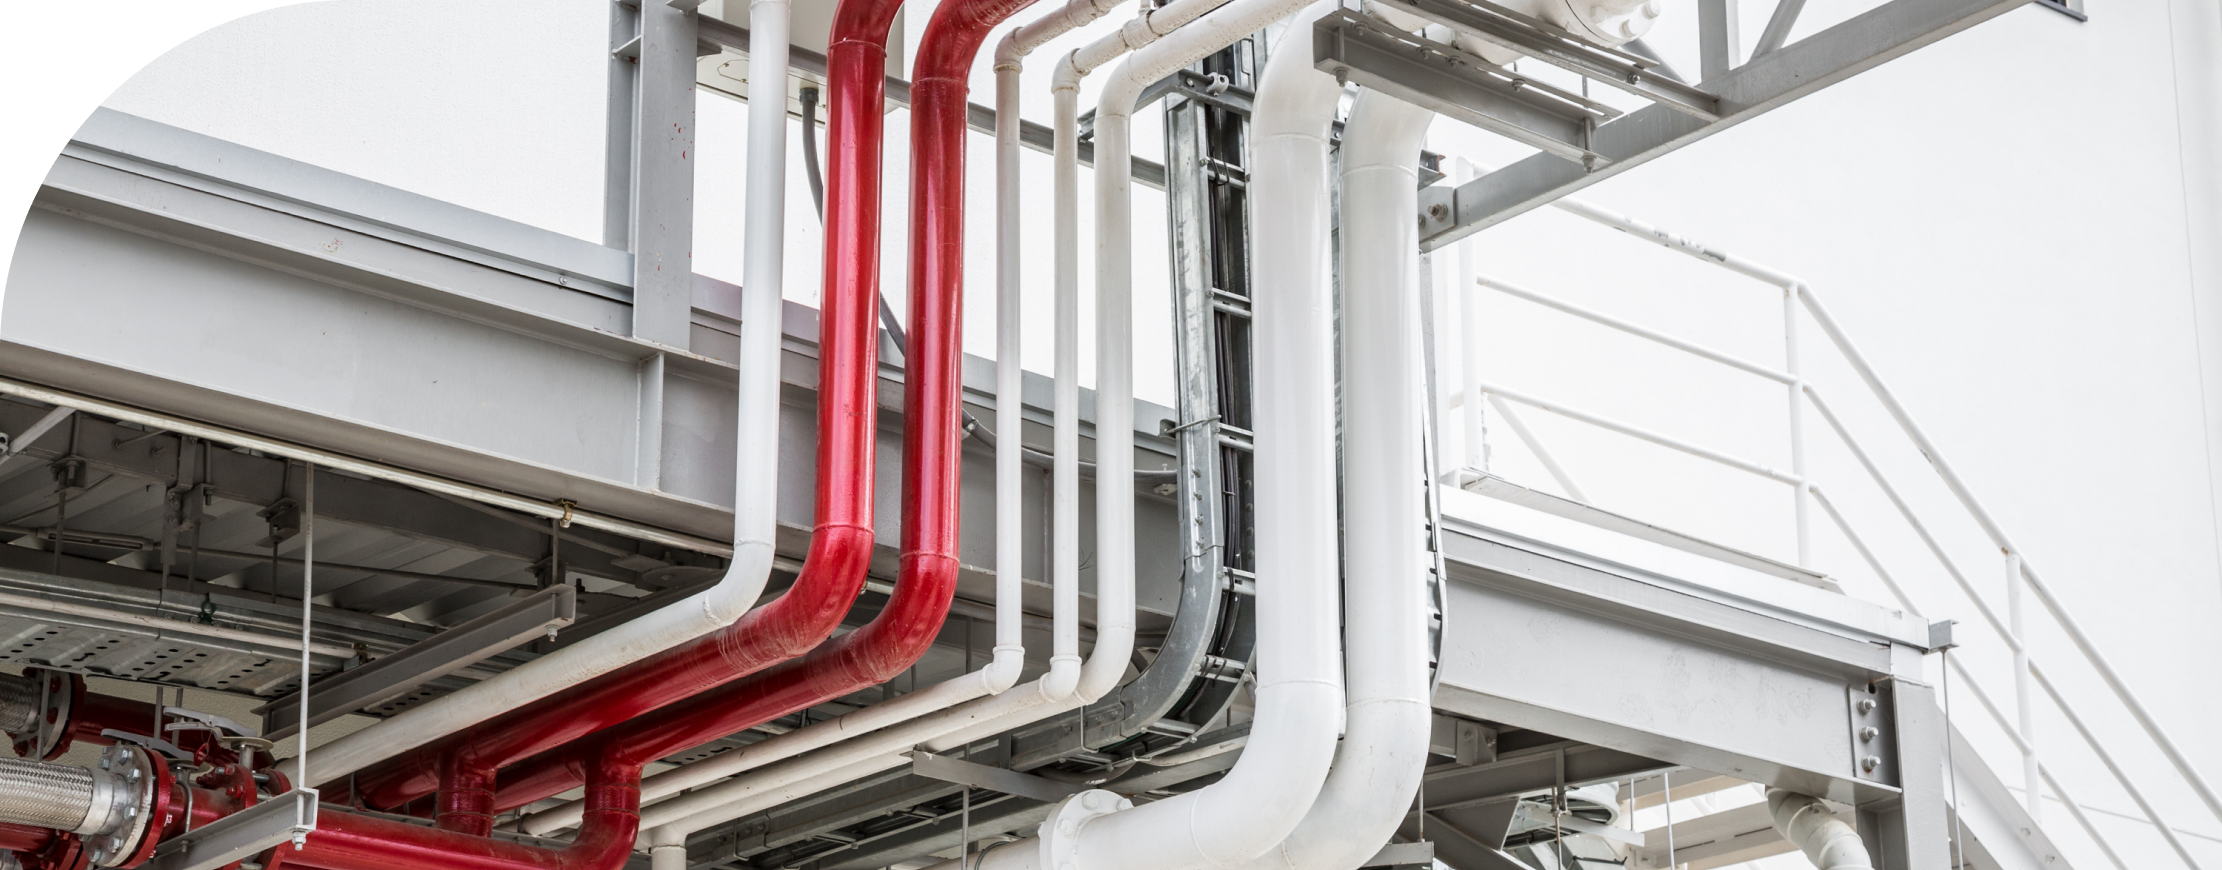 Pipes in a wastewater or storm water plant that can have Dorsett Control's controls and SCADA to help assist in better management of the system.